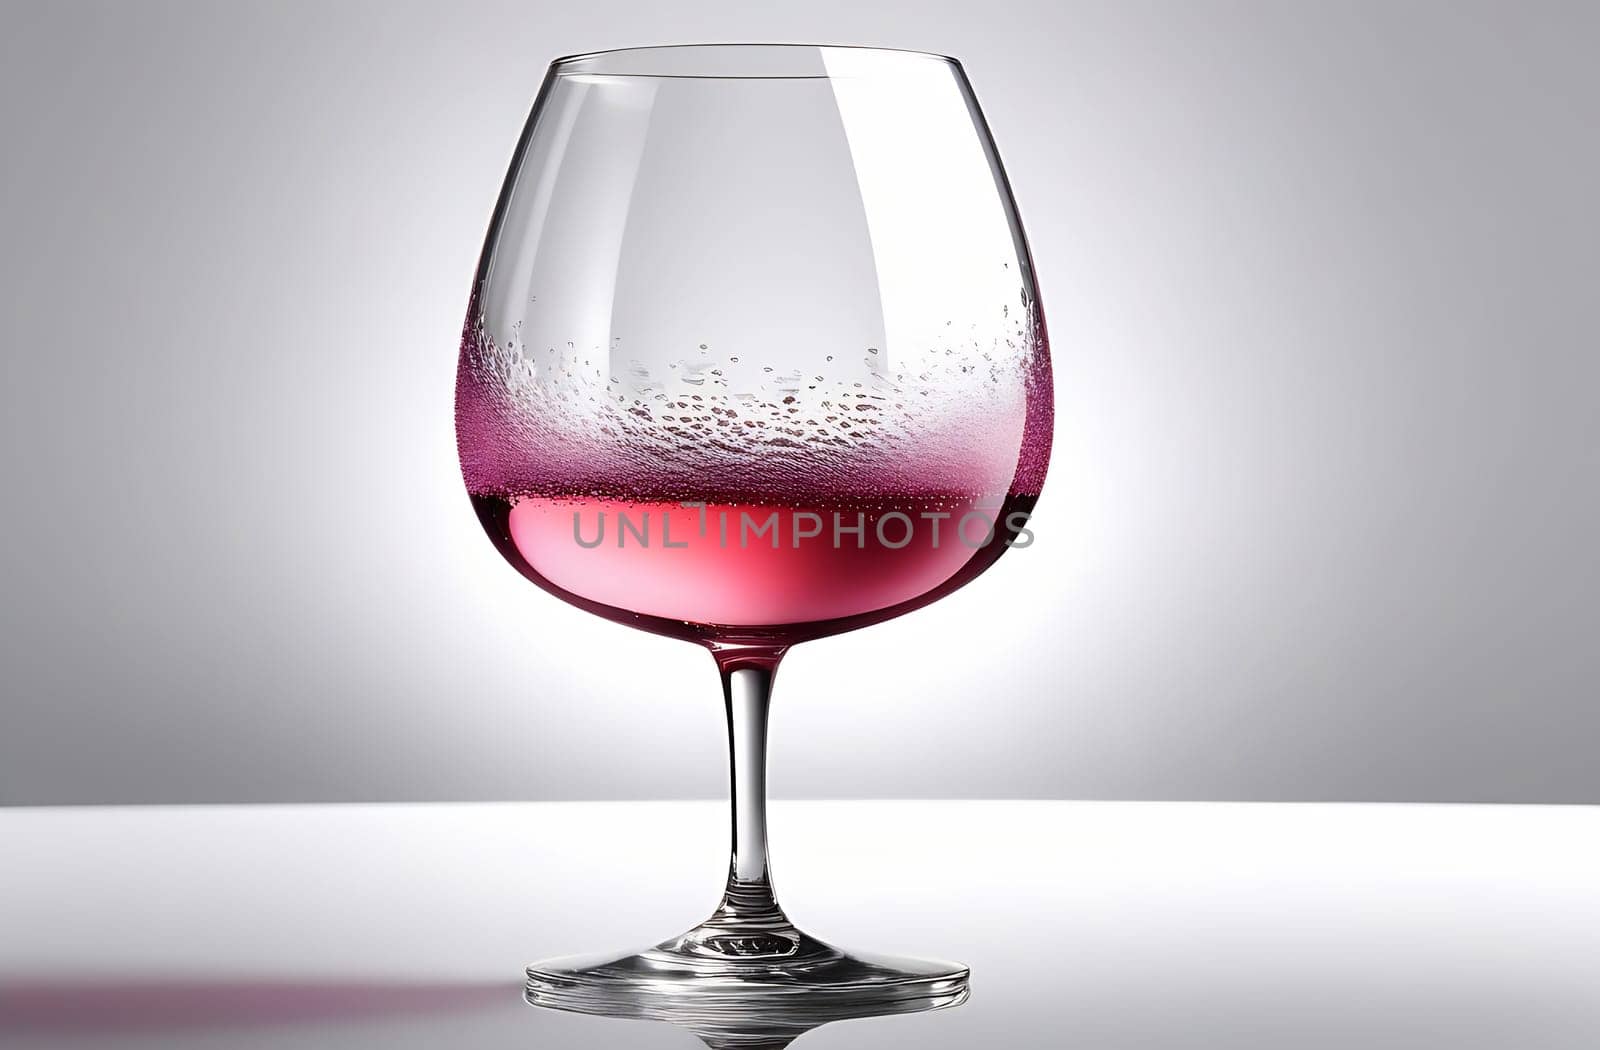 One wine glass half filled with pink sparkling wine with bubbles, close-up shots by claire_lucia